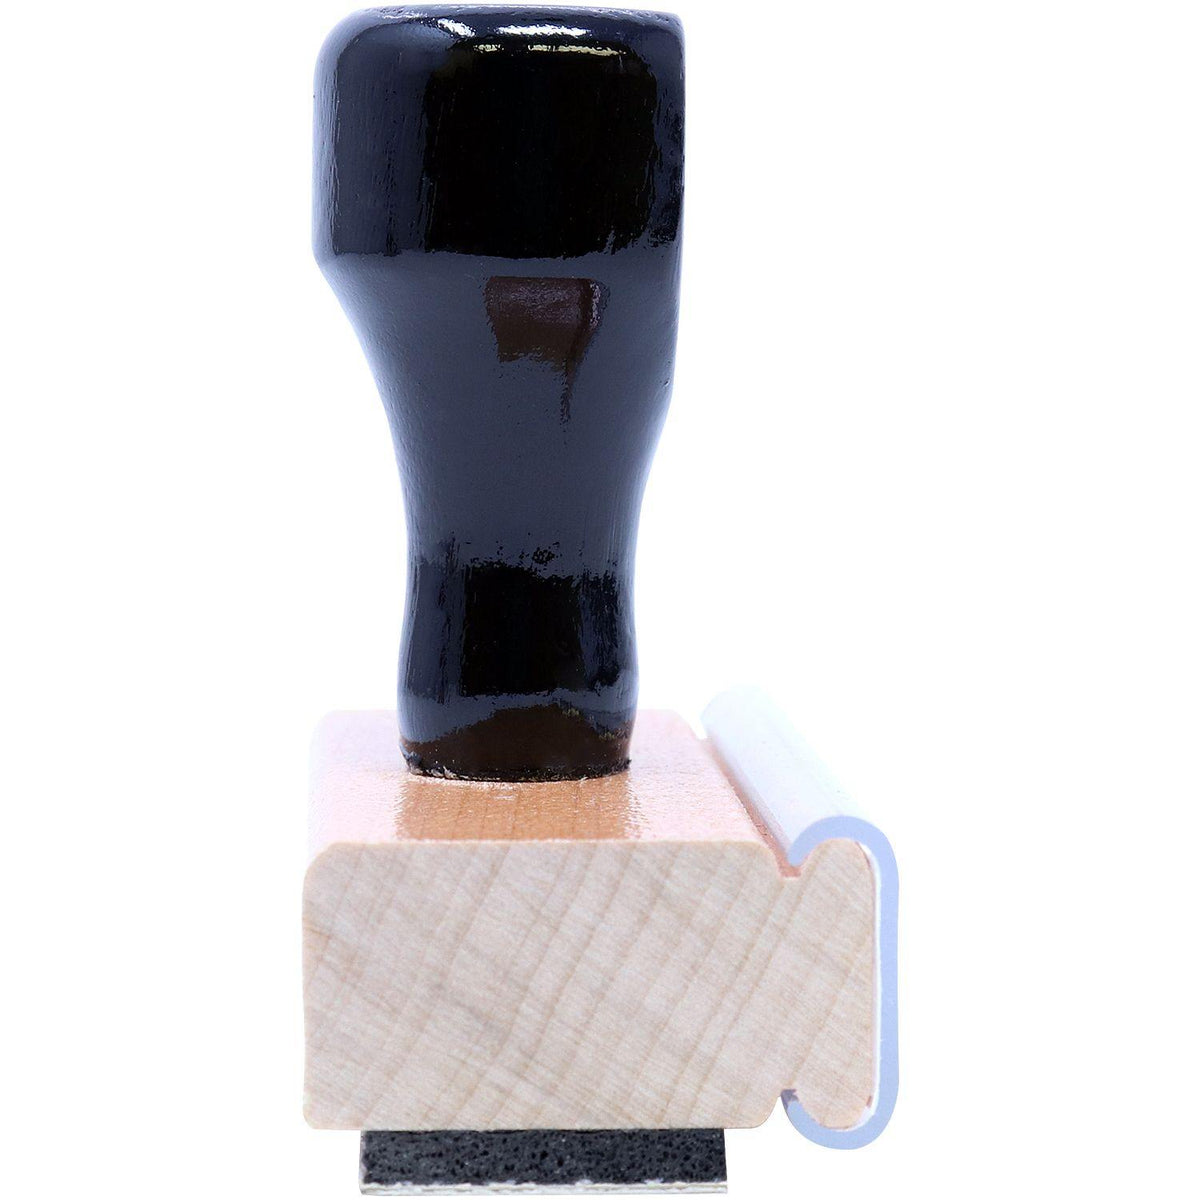 Side View of Large Muestra Rubber Stamp